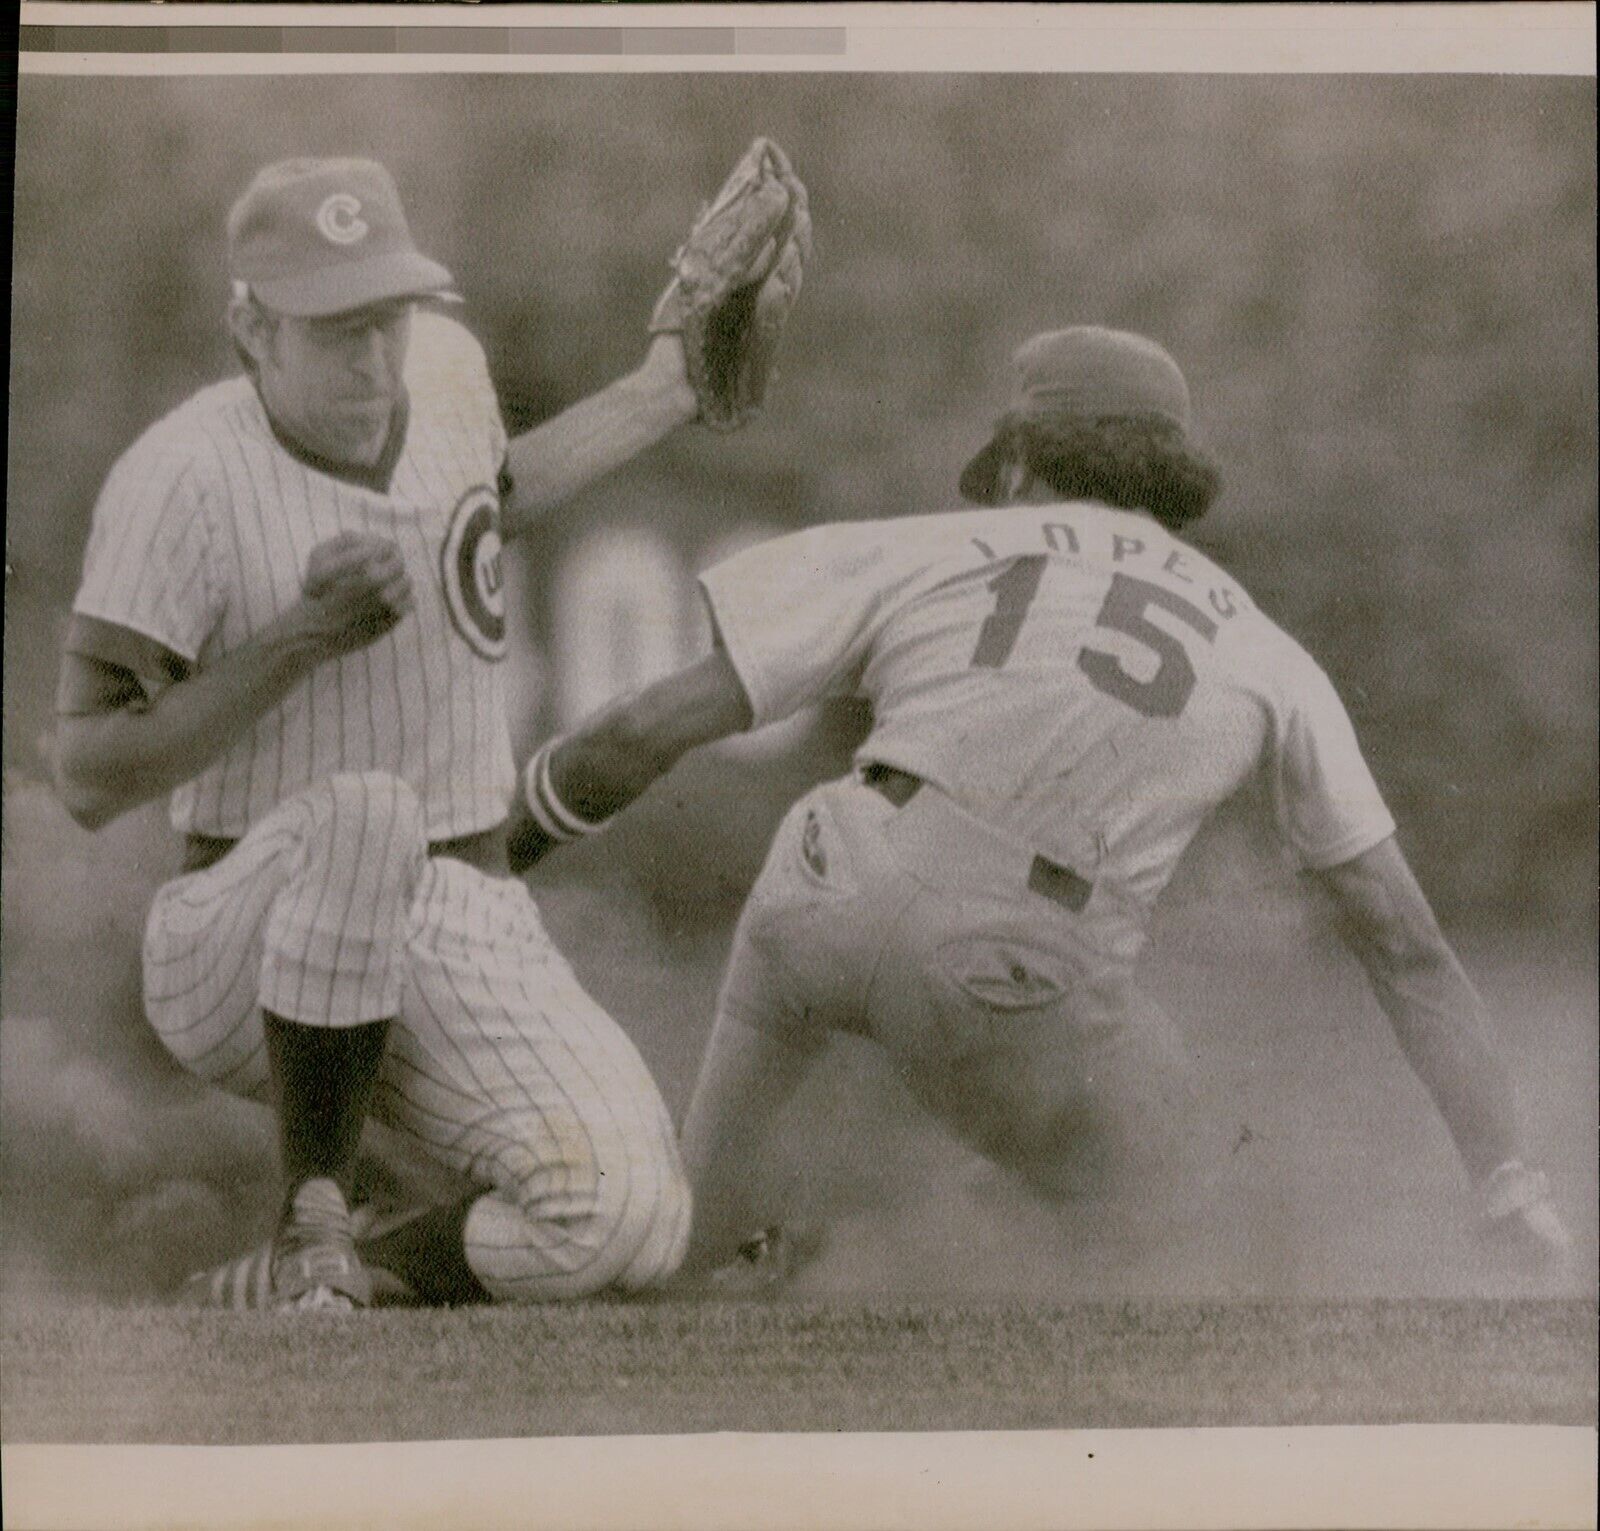 LG793 1975 Wire Photo DAVEY LOPES Los Angeles Dodgers DON KESSINGER Chicago Cubs